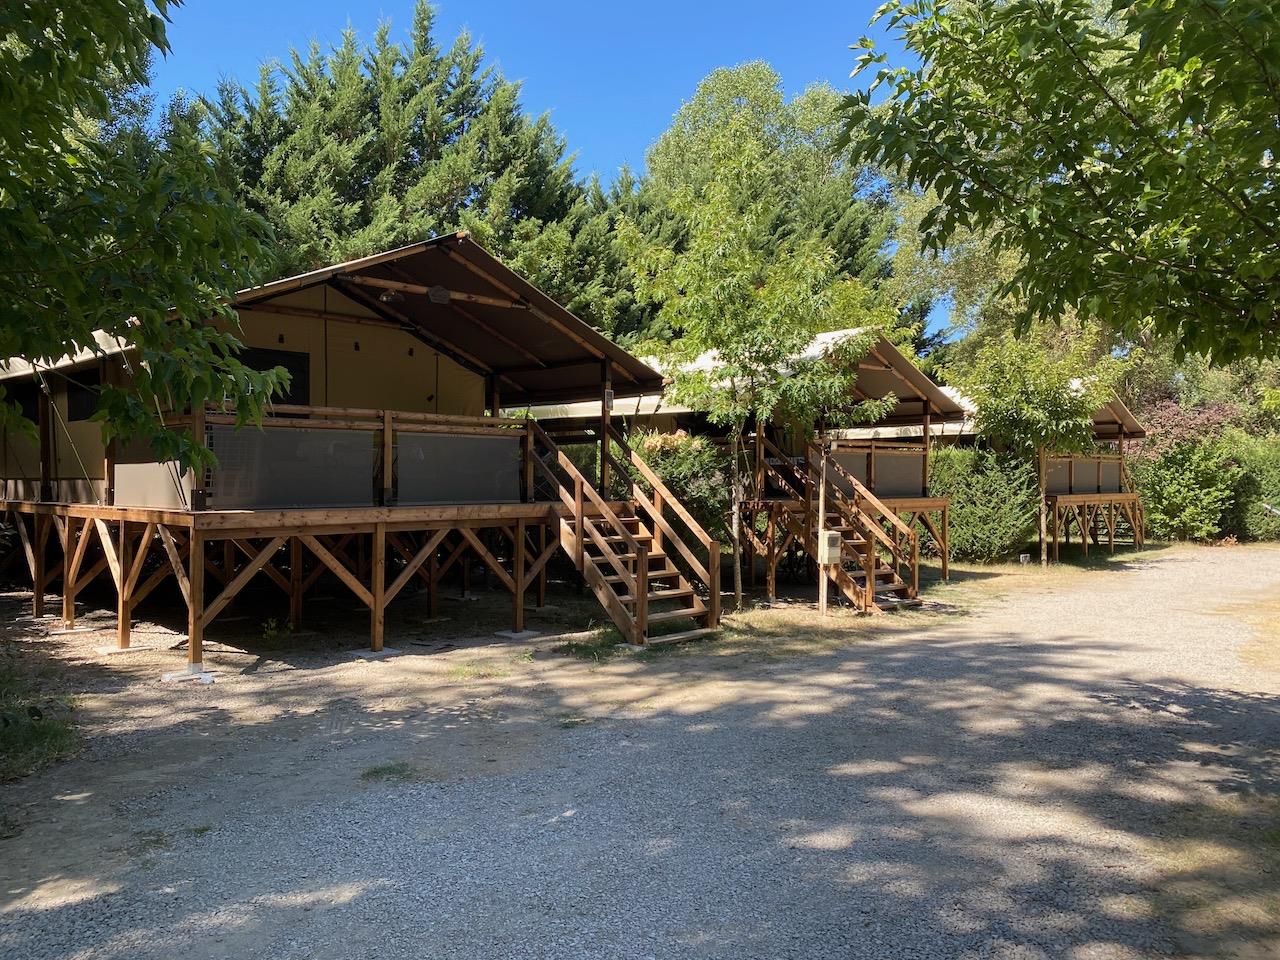 Accommodation - Lodge On Piles Confort 46M² (2 Bedrooms) Sheltered Terrace 10M² - Flower Camping La Rivière